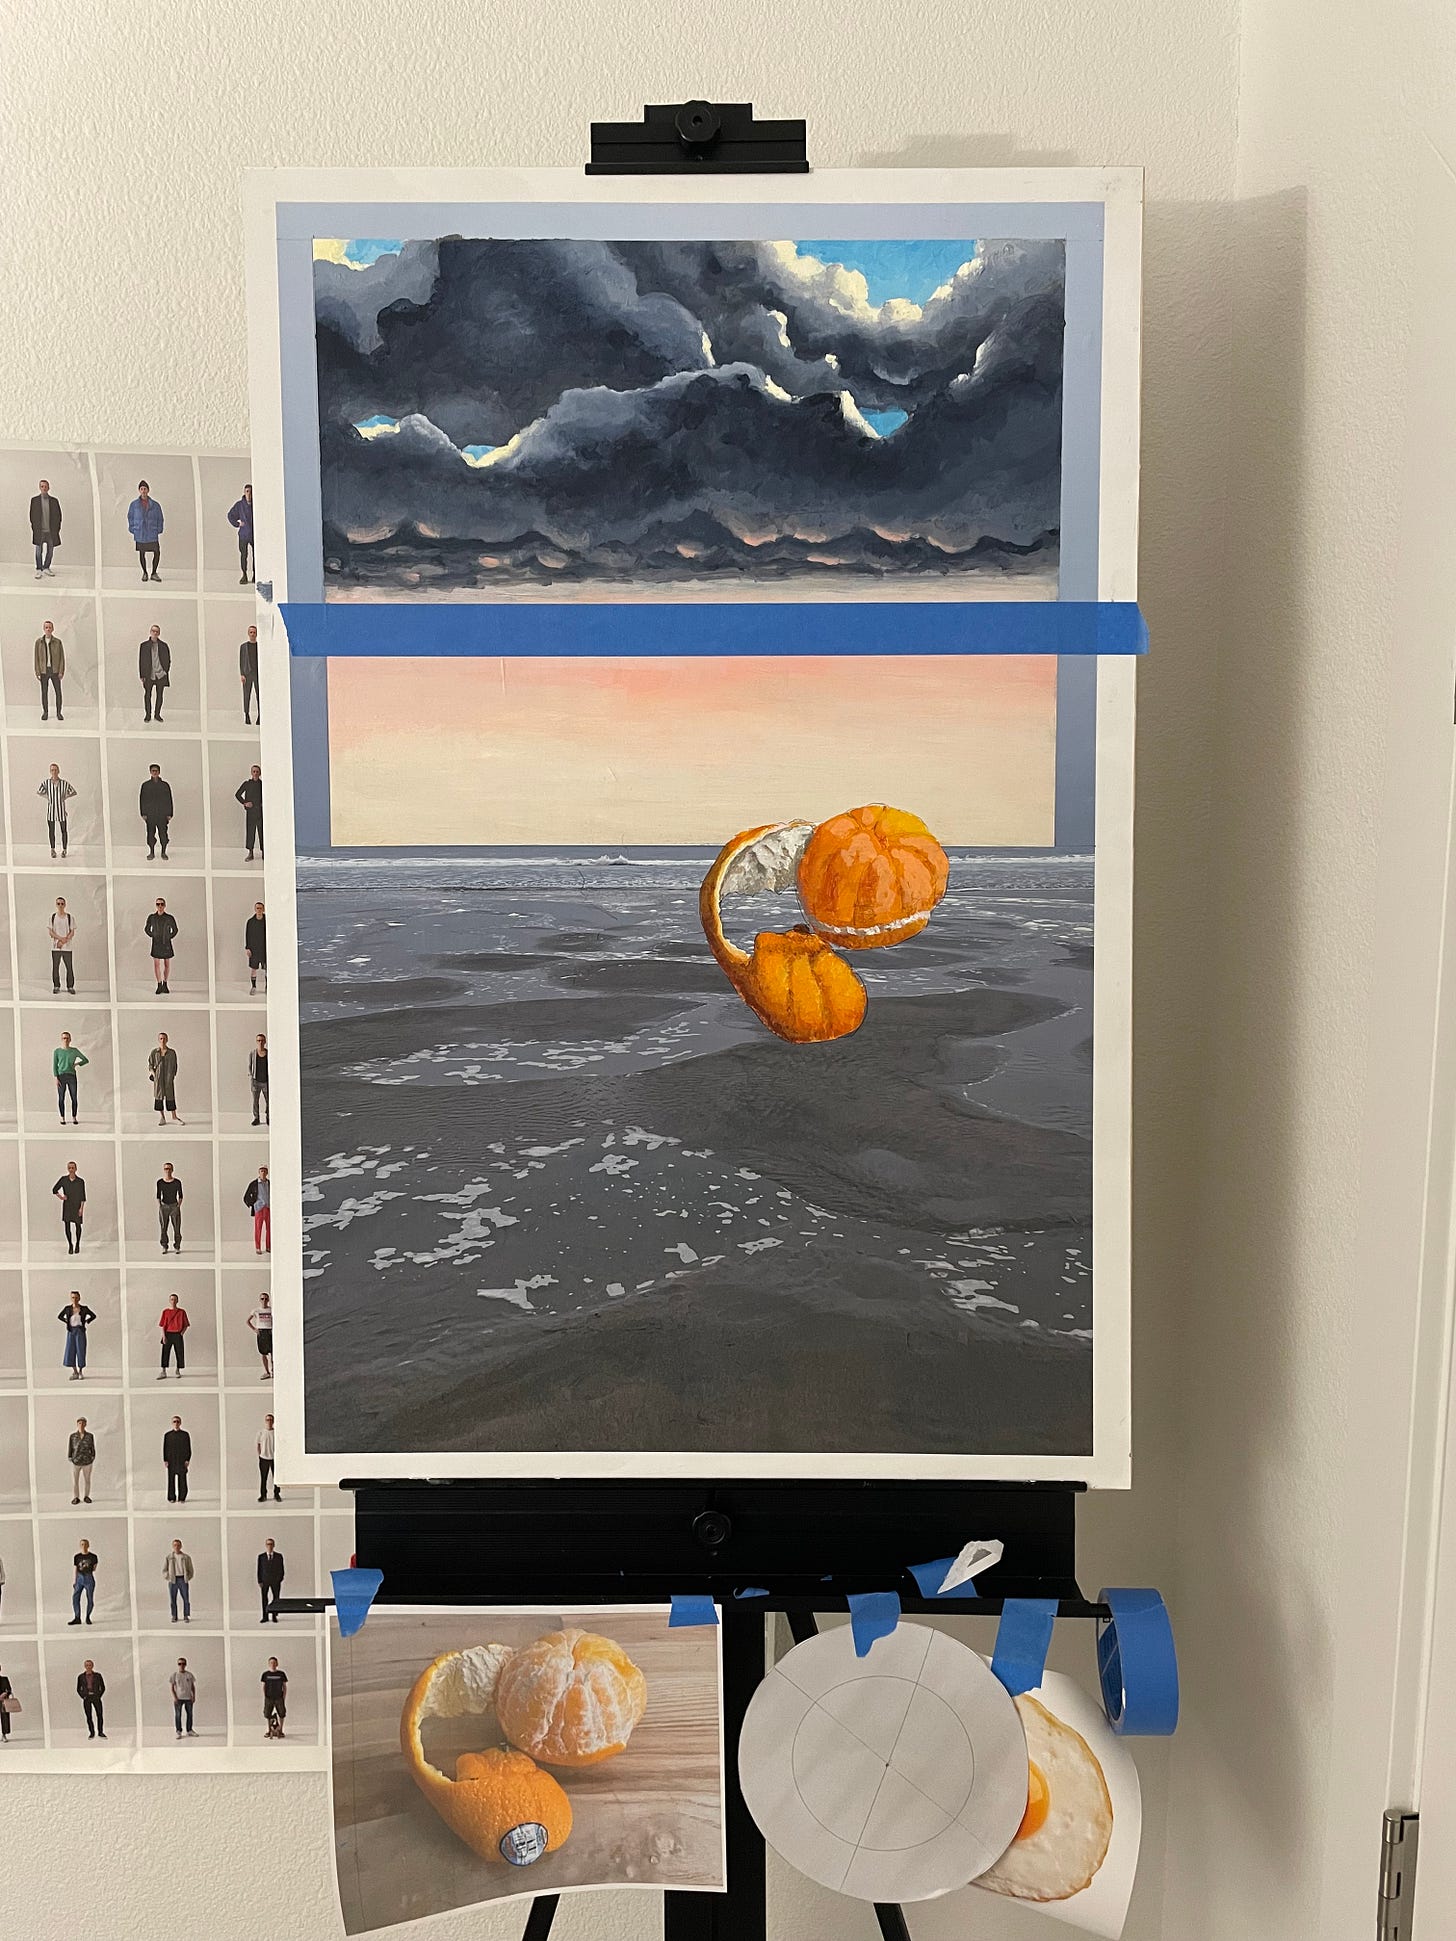 Photo of a painting in progress, illustrating poorly painted clouds.